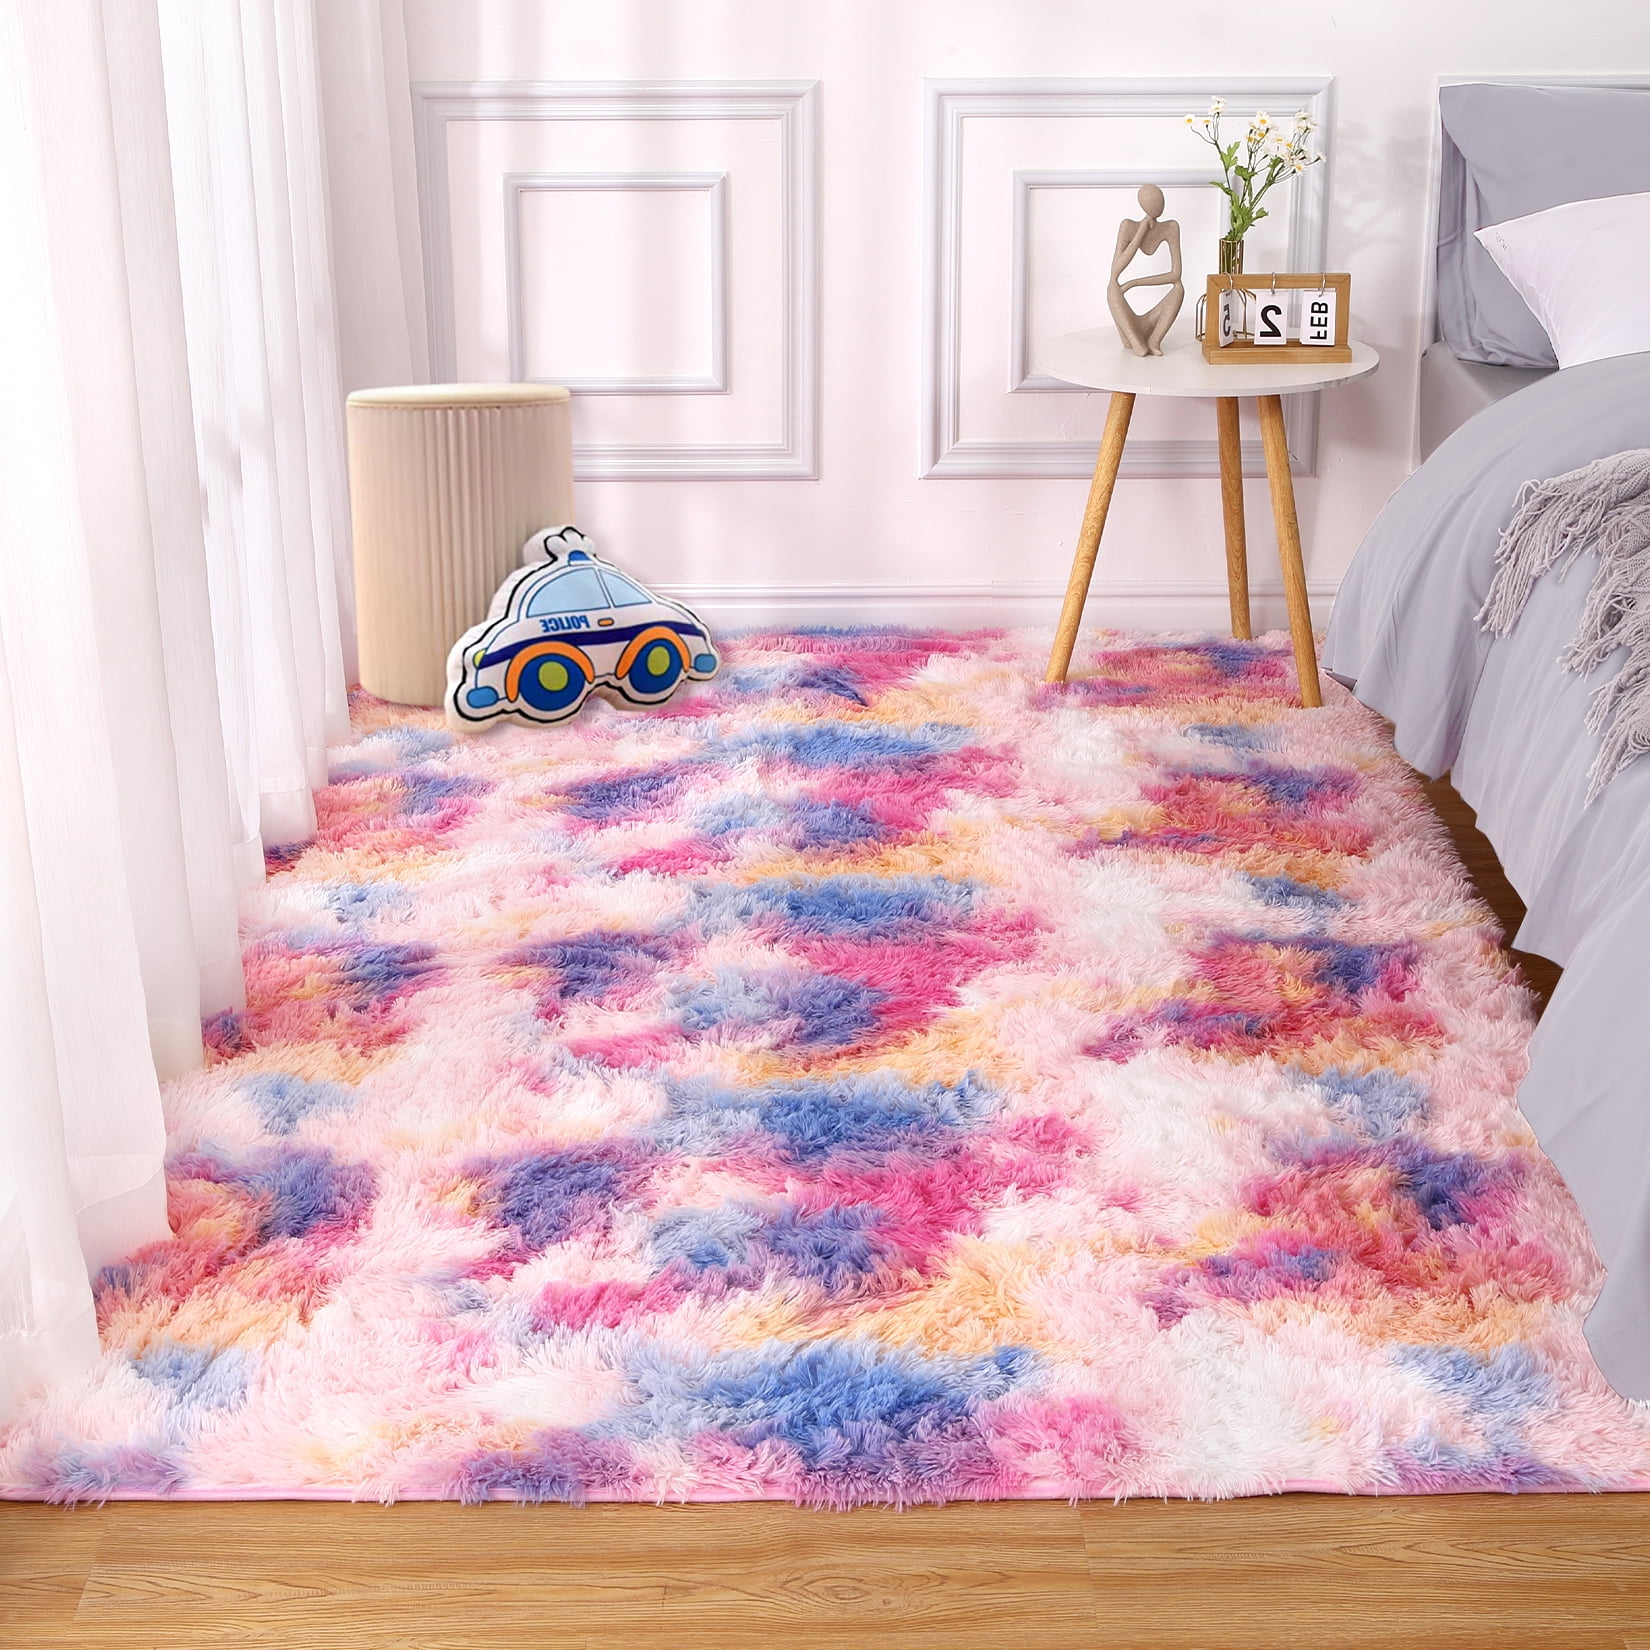  ZWPILY Shaggy Soft Area Rug Tie-Dyed Faux Fur Indoor Fluffy  Non-Slip Rugs Modern Home Decor for Bedroom,Kidsroom,Living Room Rugs 30mm  Thick Pile Height Modern Area Rugs,Purple,200x300 cm : Home & Kitchen